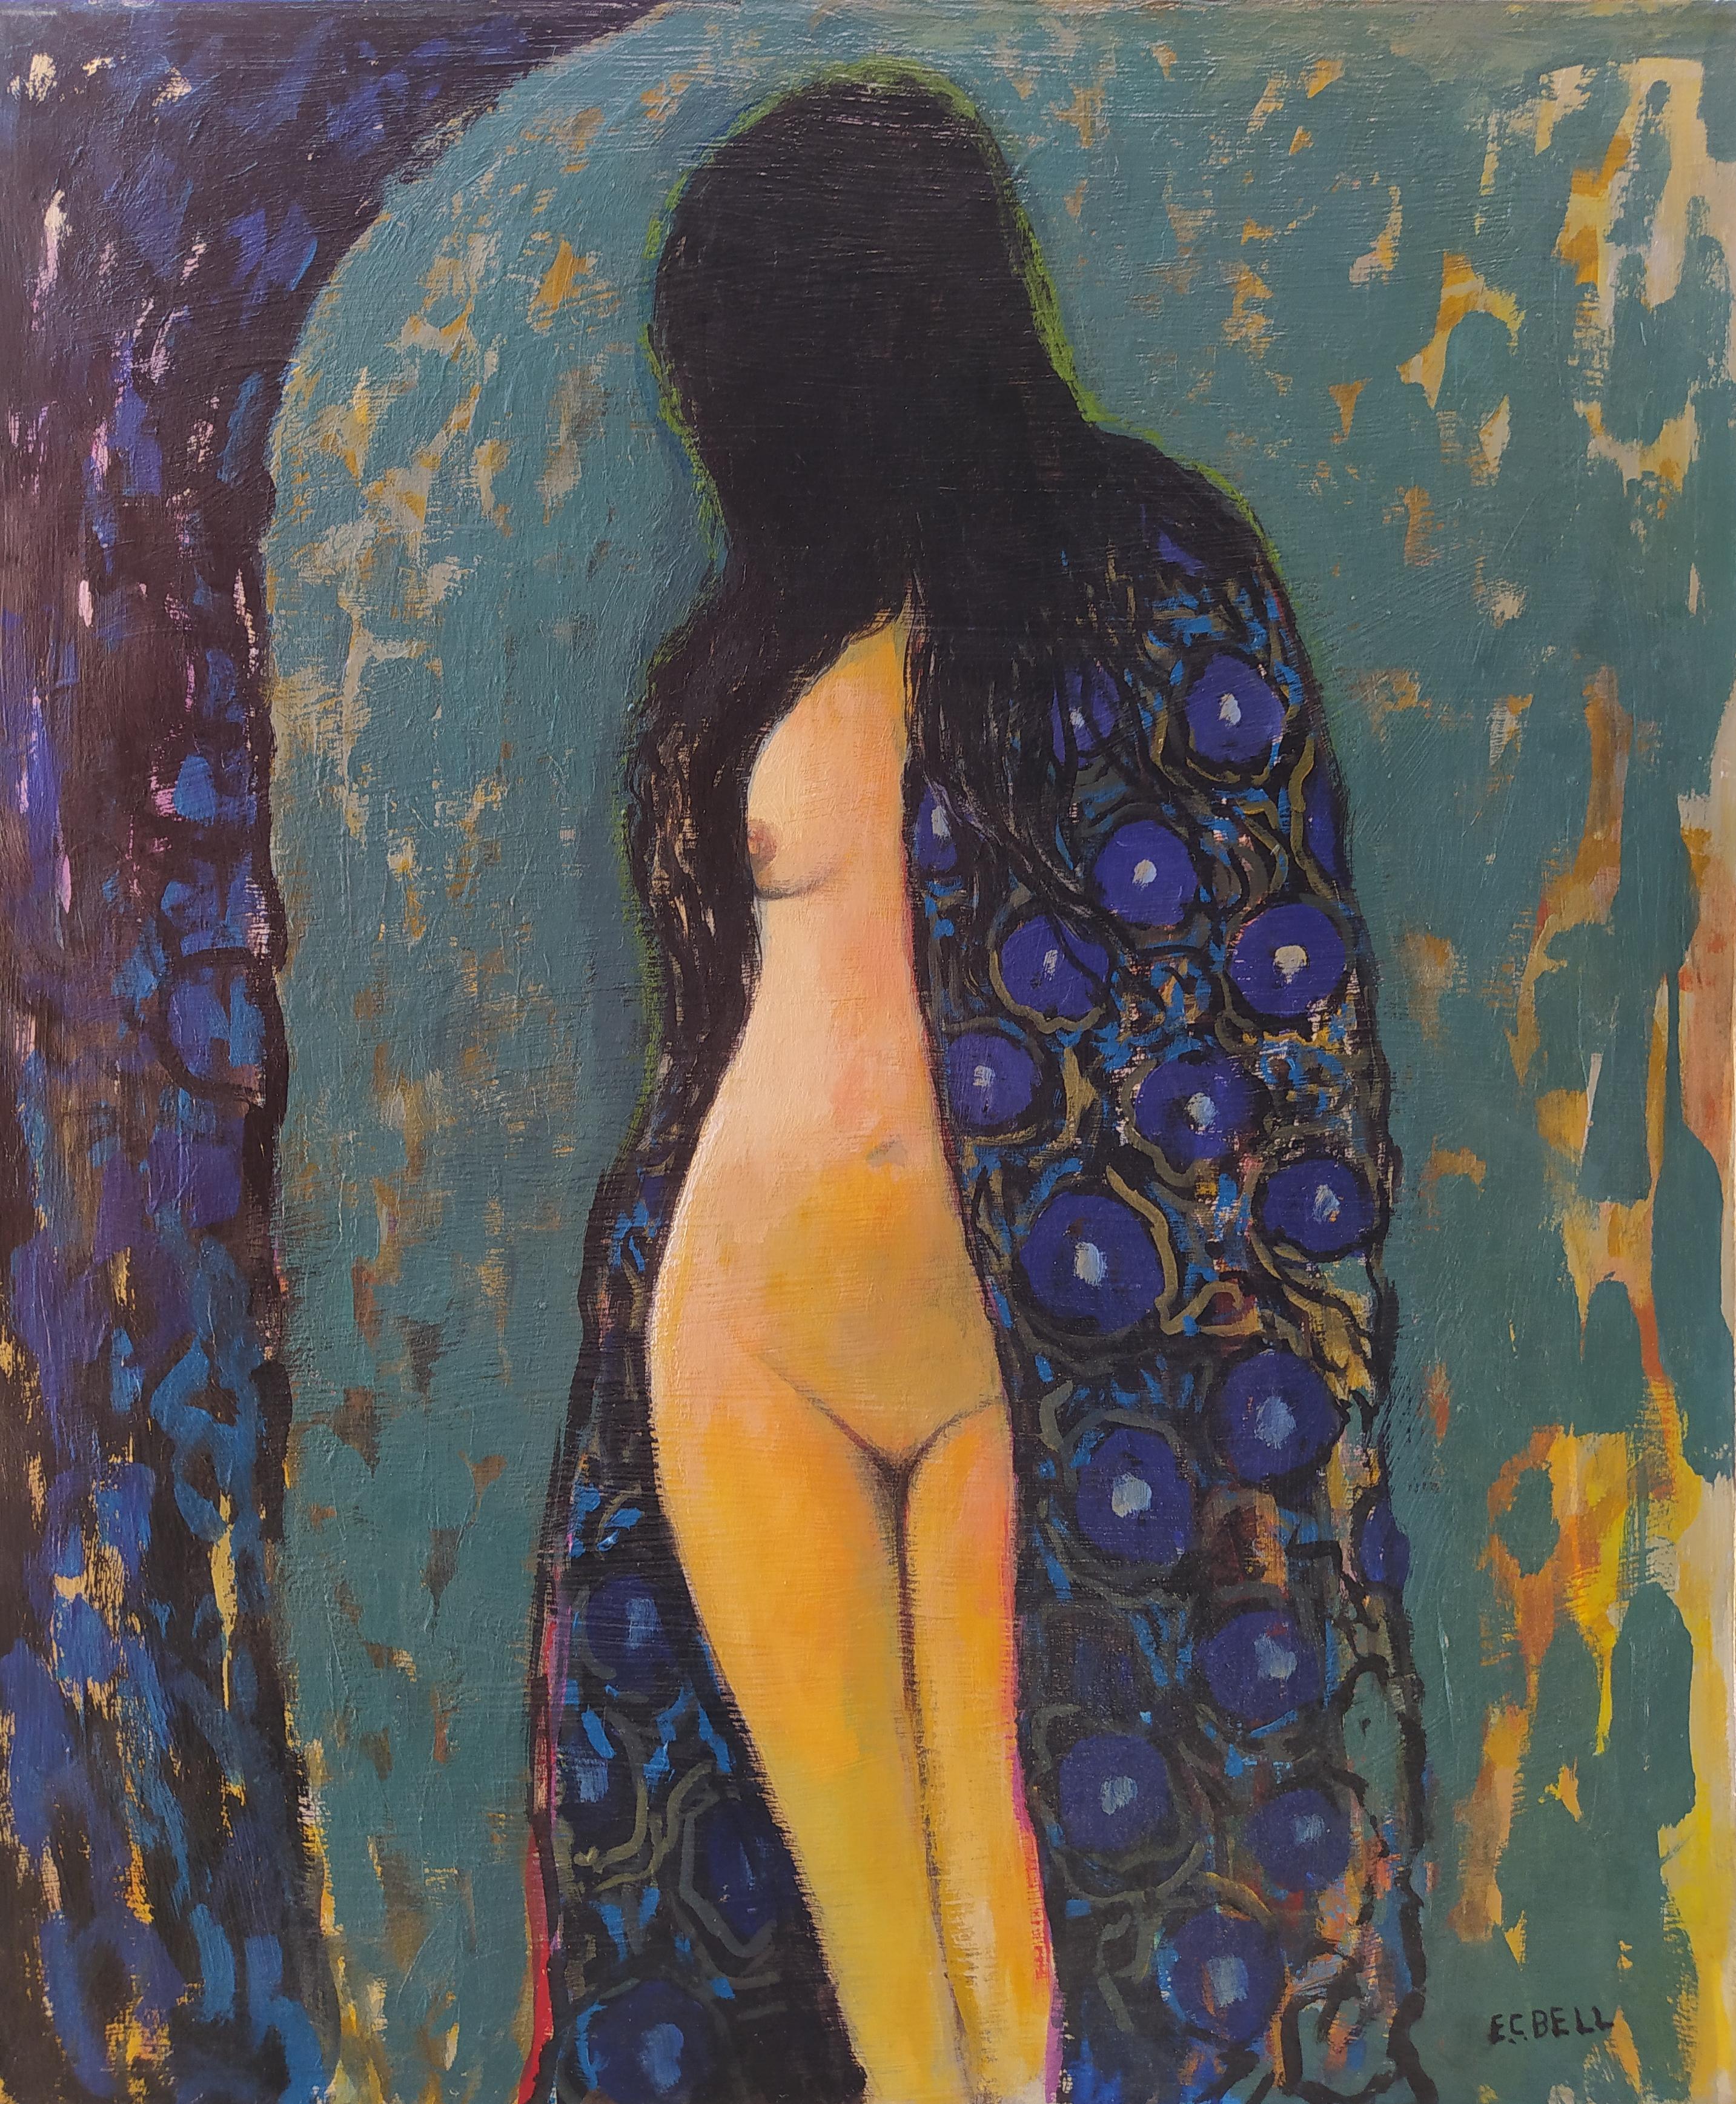 Figurative Painting E.C. Bell - Robe « Morning Glory Gown » - Femme expressionniste verticale semi-nue avec robe.